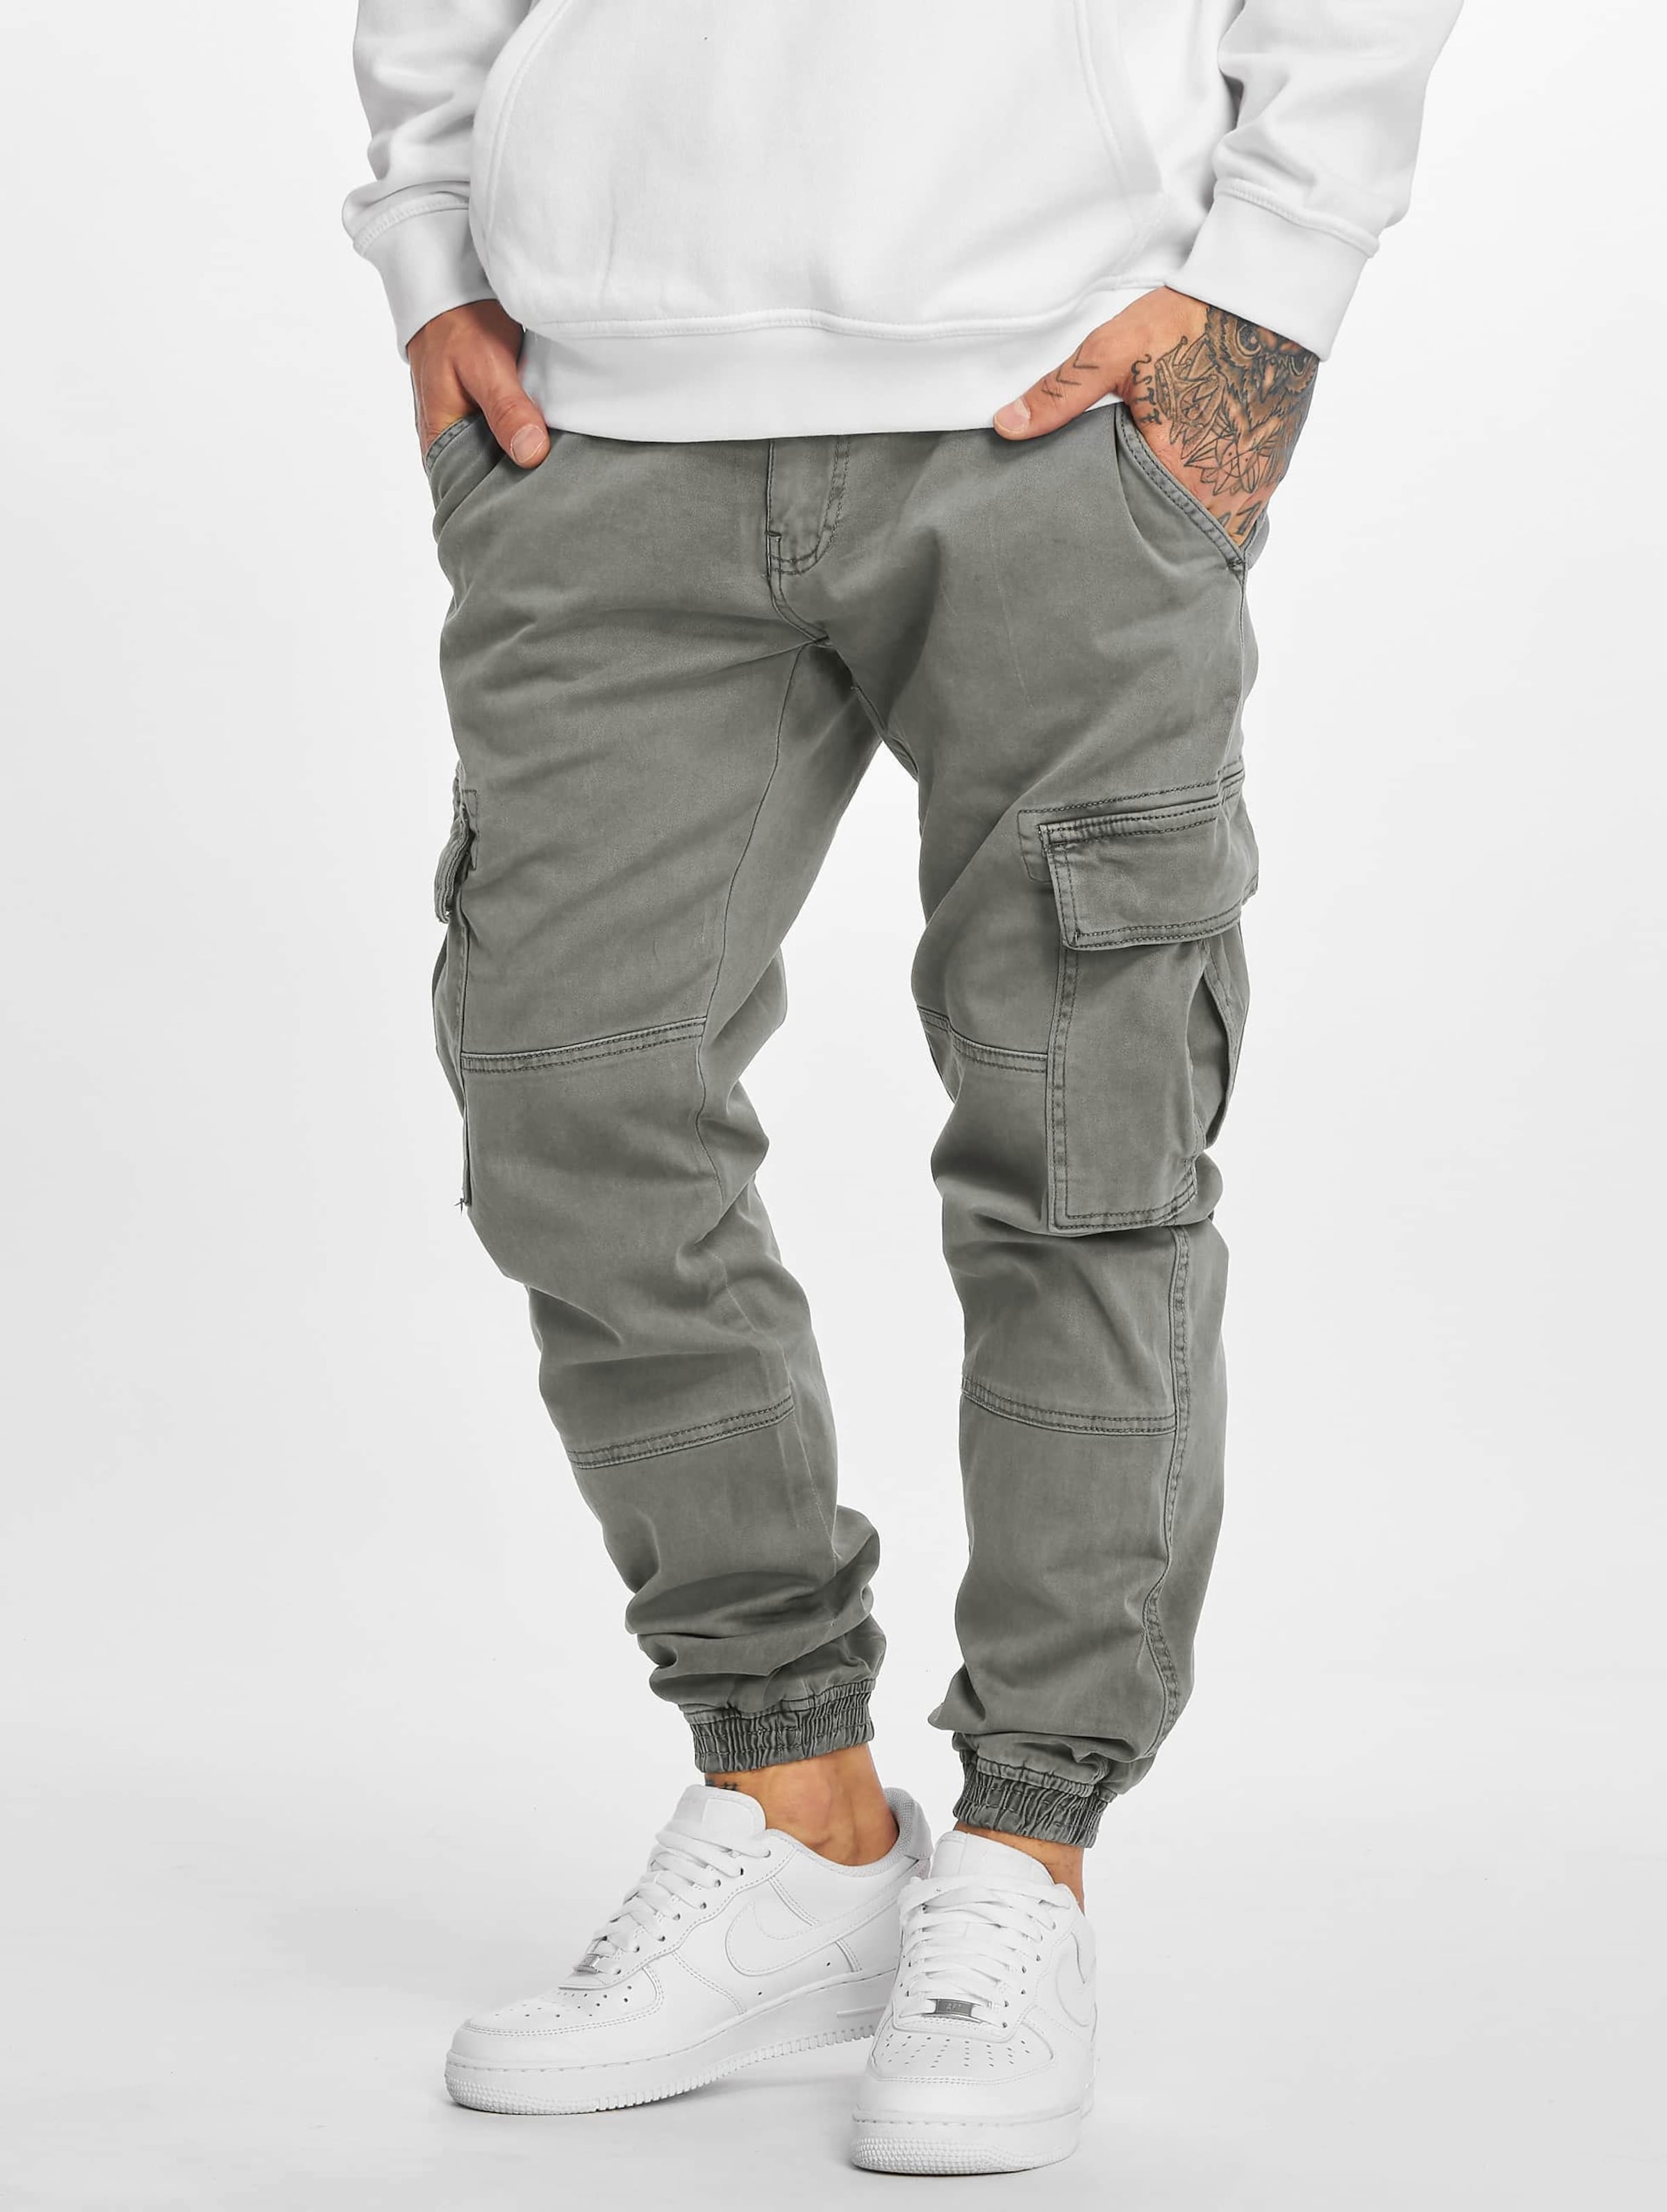 Urban Classics Washed Cargo Twill Jogging Pants product